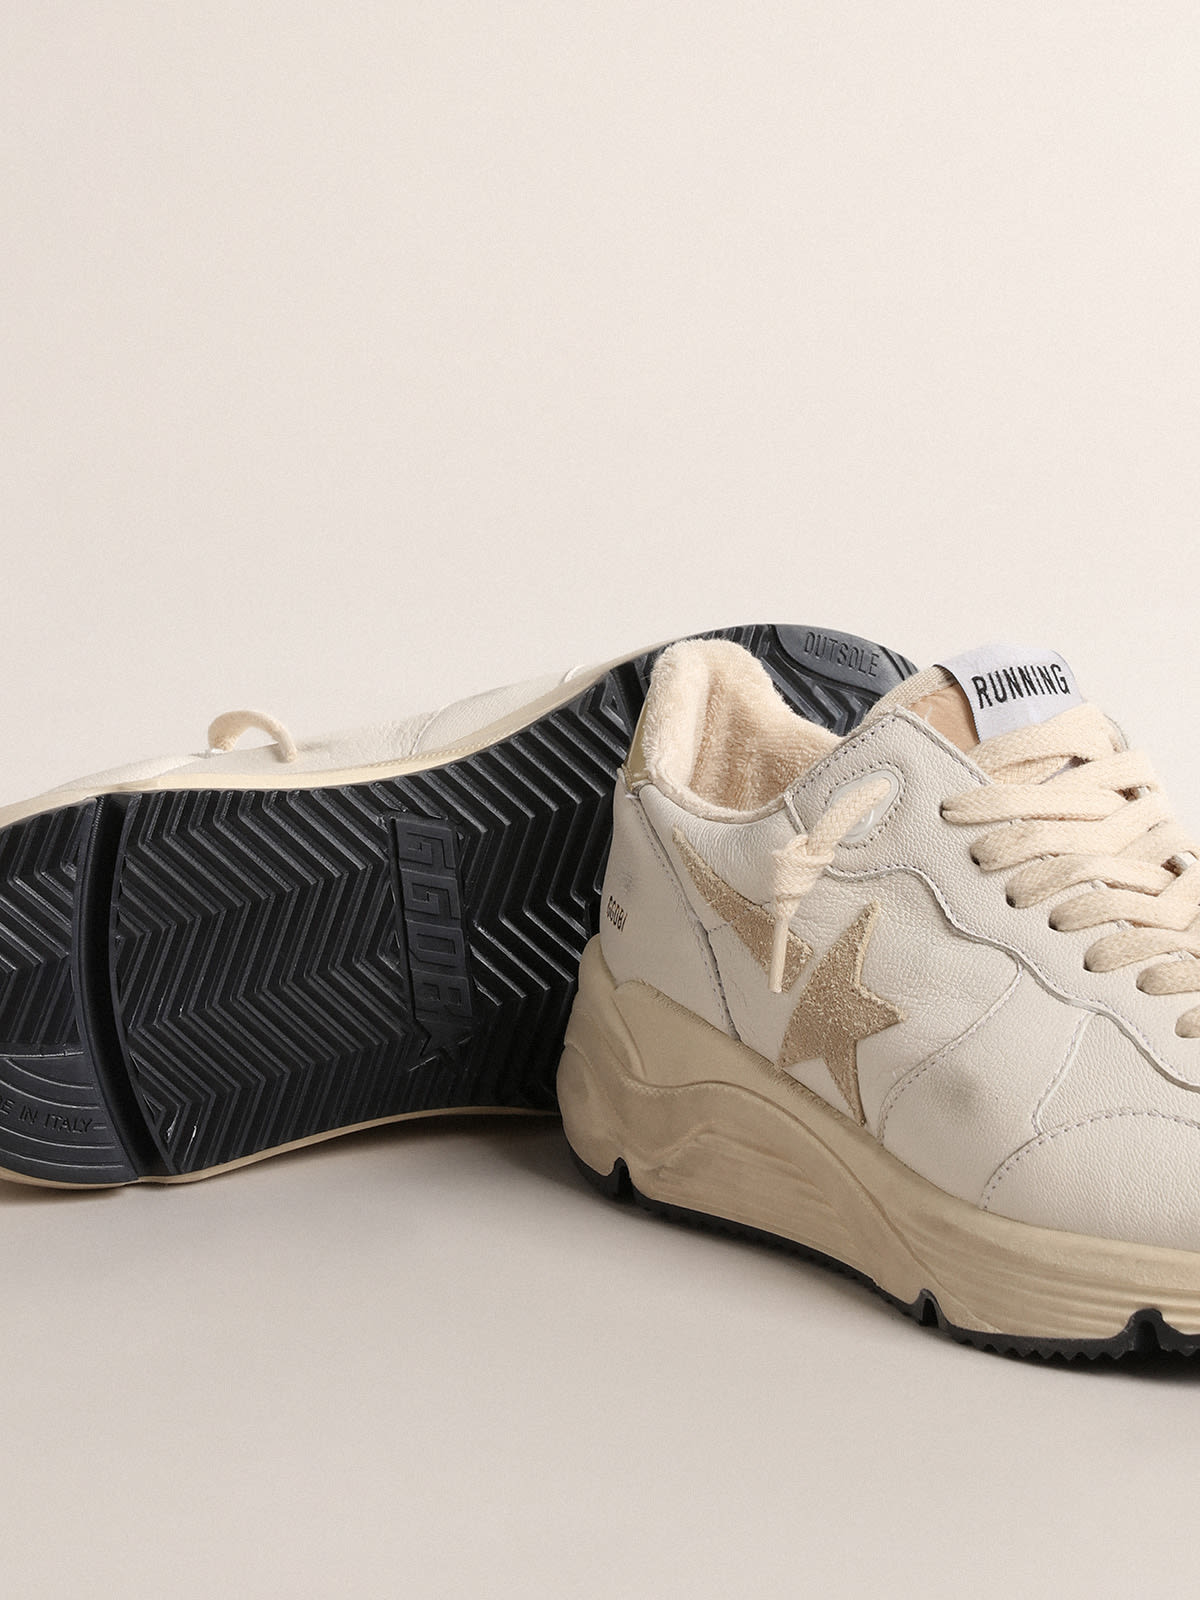 Golden Goose - Running Sole LTD in nappa with suede star and gold heel tab in 